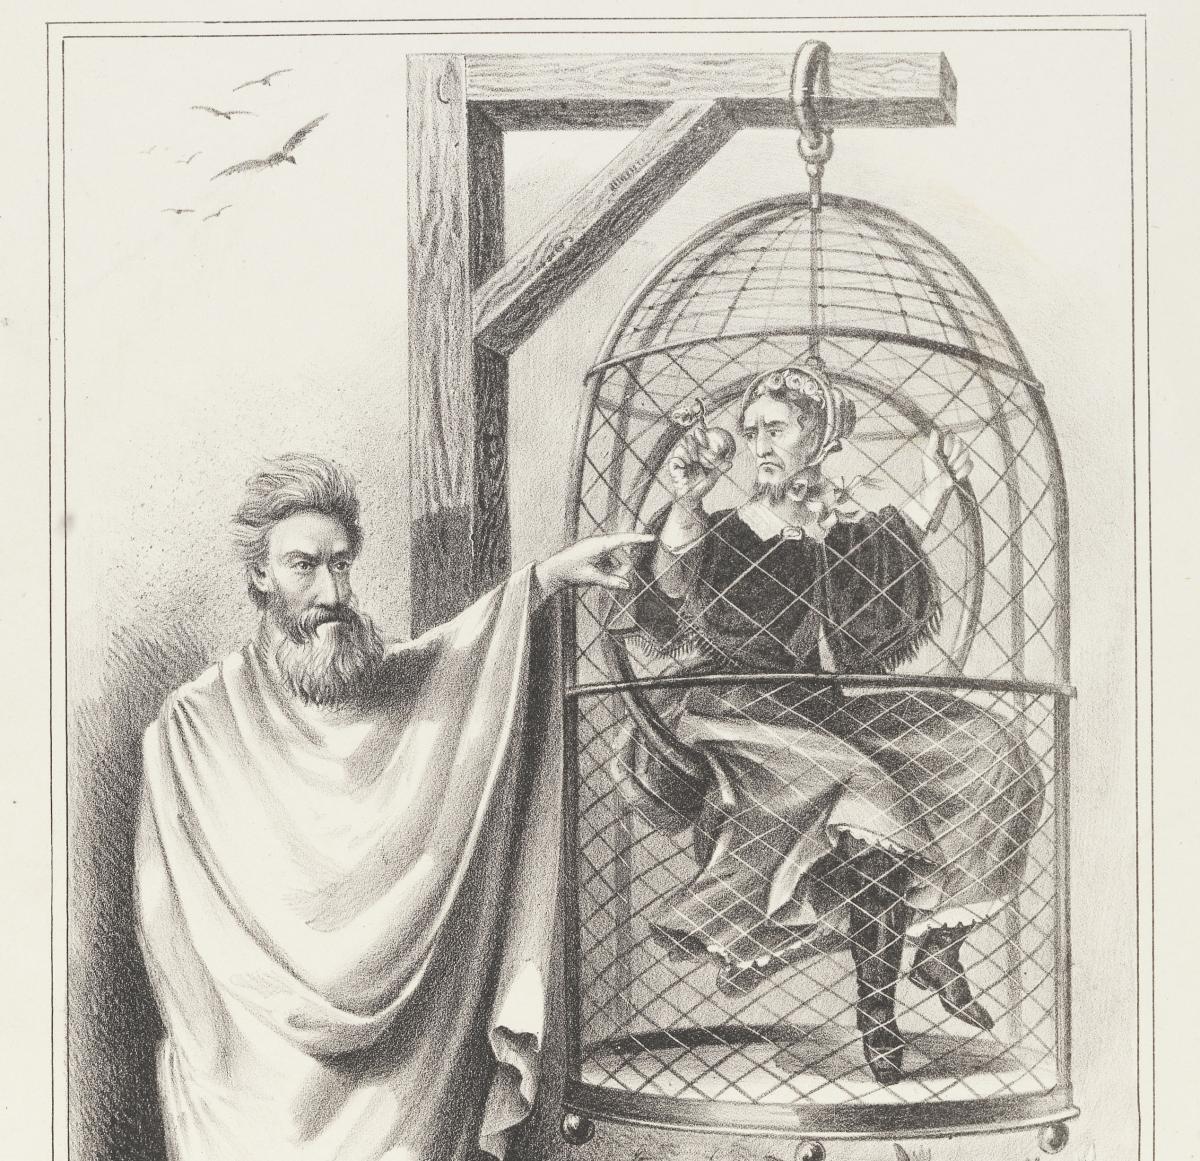 Detail from political cartoon showing John Brown standing next to a birdcage suspended from a gallows, in which sits Jefferson Davis, clothed in a women's dress and bonnet.